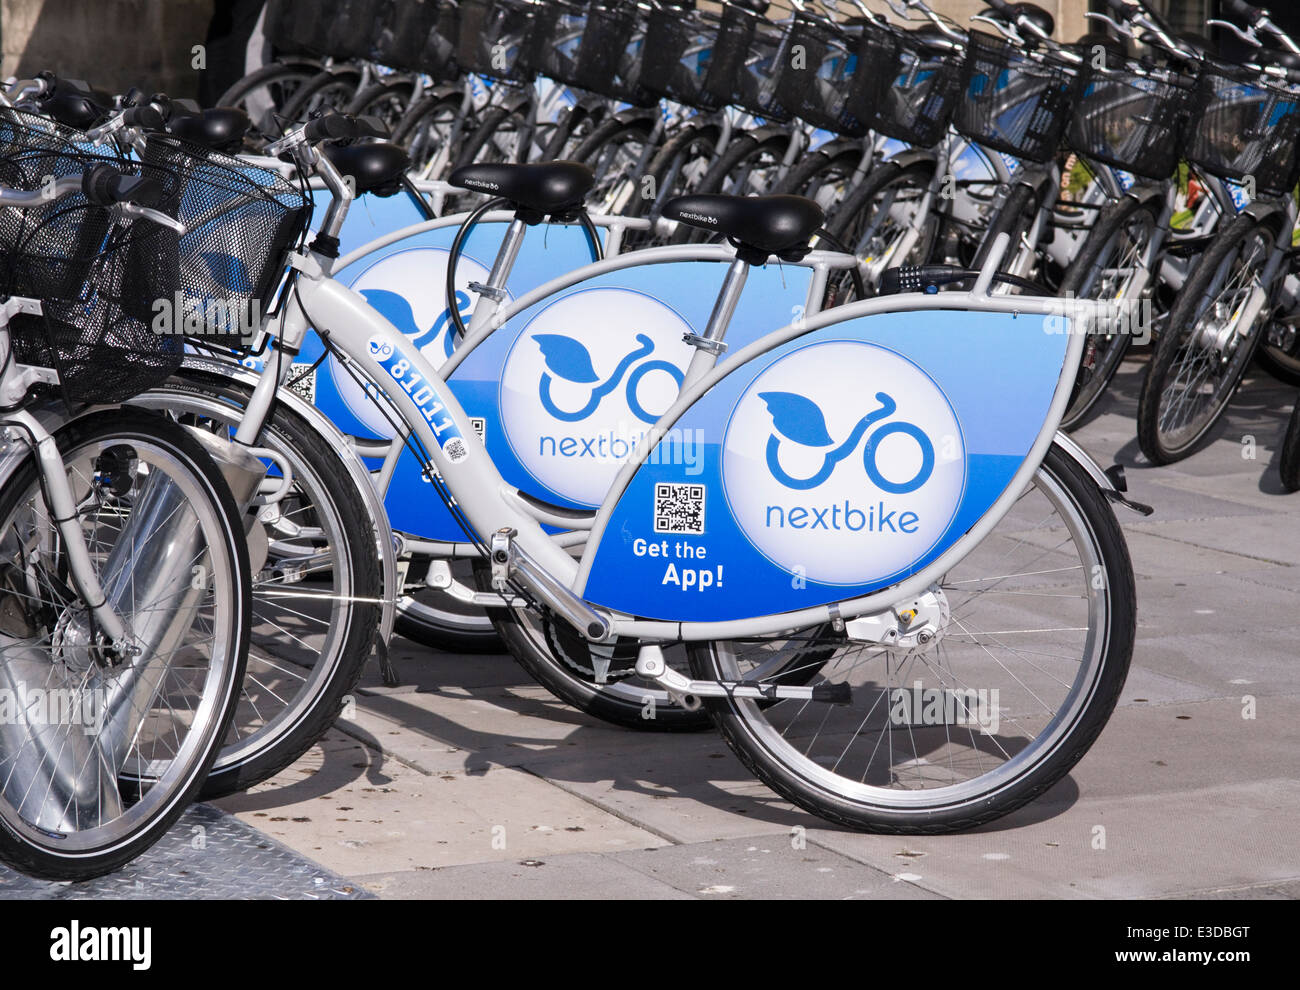 The public Bike Hire scheme in the City of Bath Somerset. run by the Nextbike company. Stock Photo